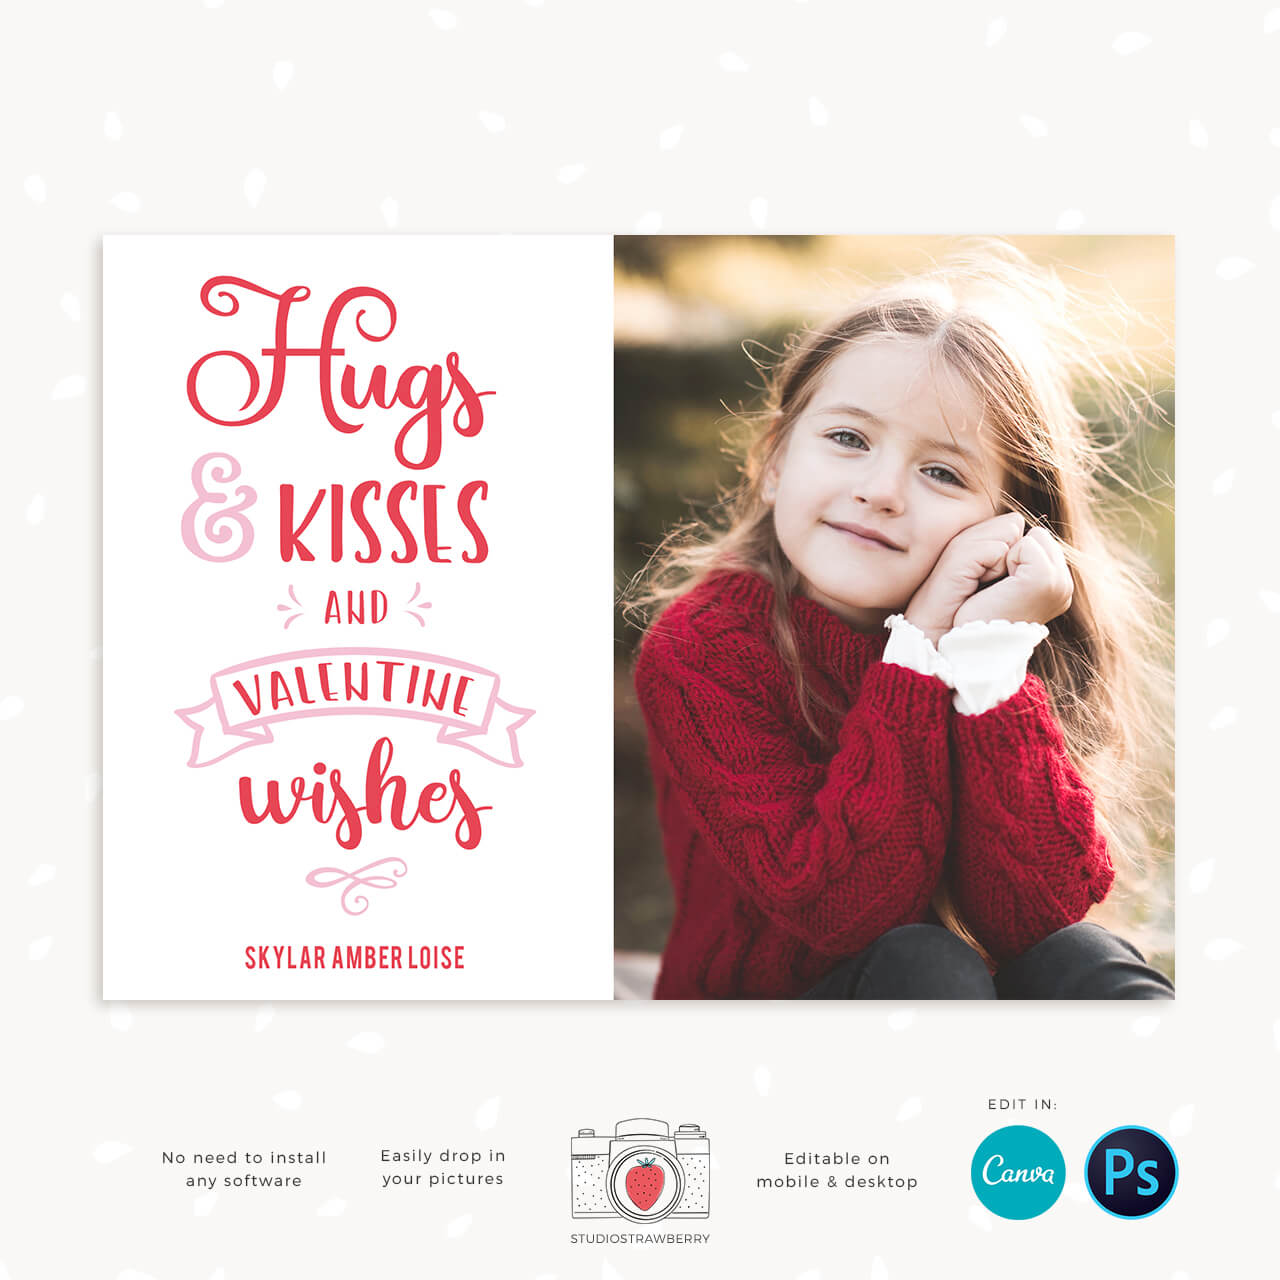 Hugs kisses and valentine wishes valentine card canva